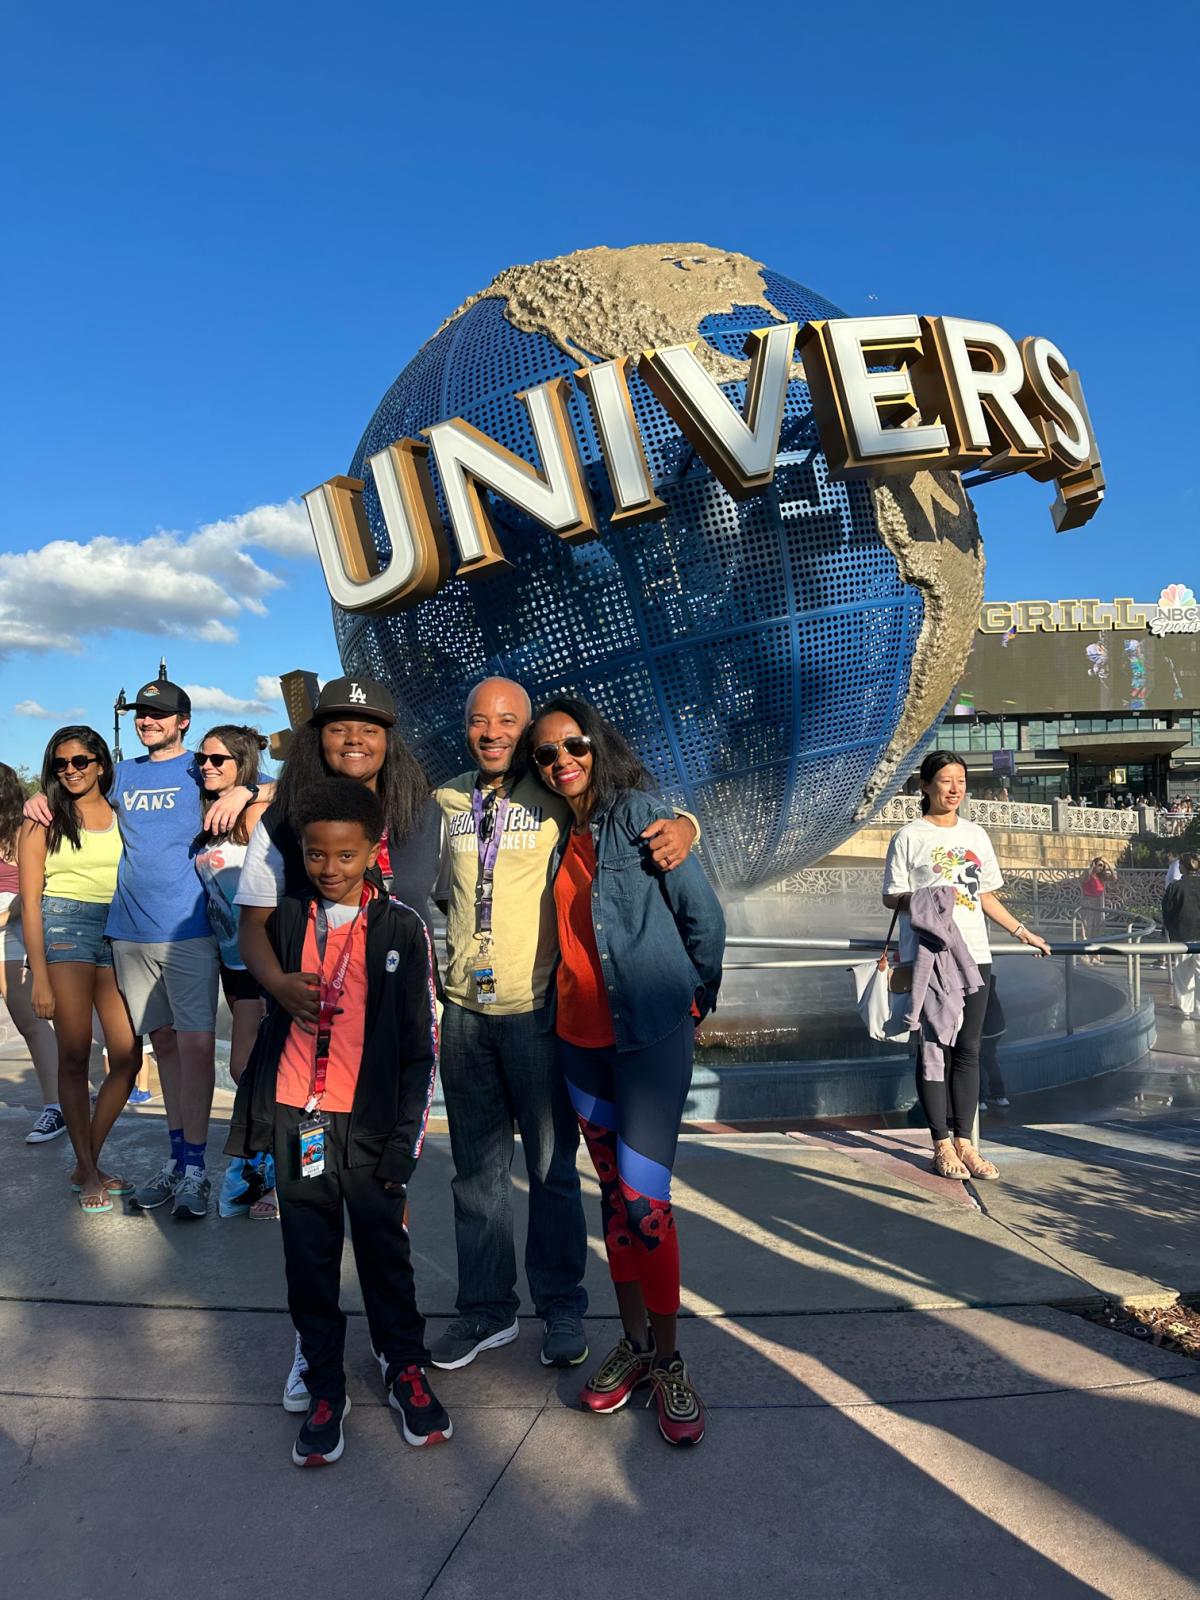 The Beyah family at Universal Studios, standing in front of a globe and Universal sign